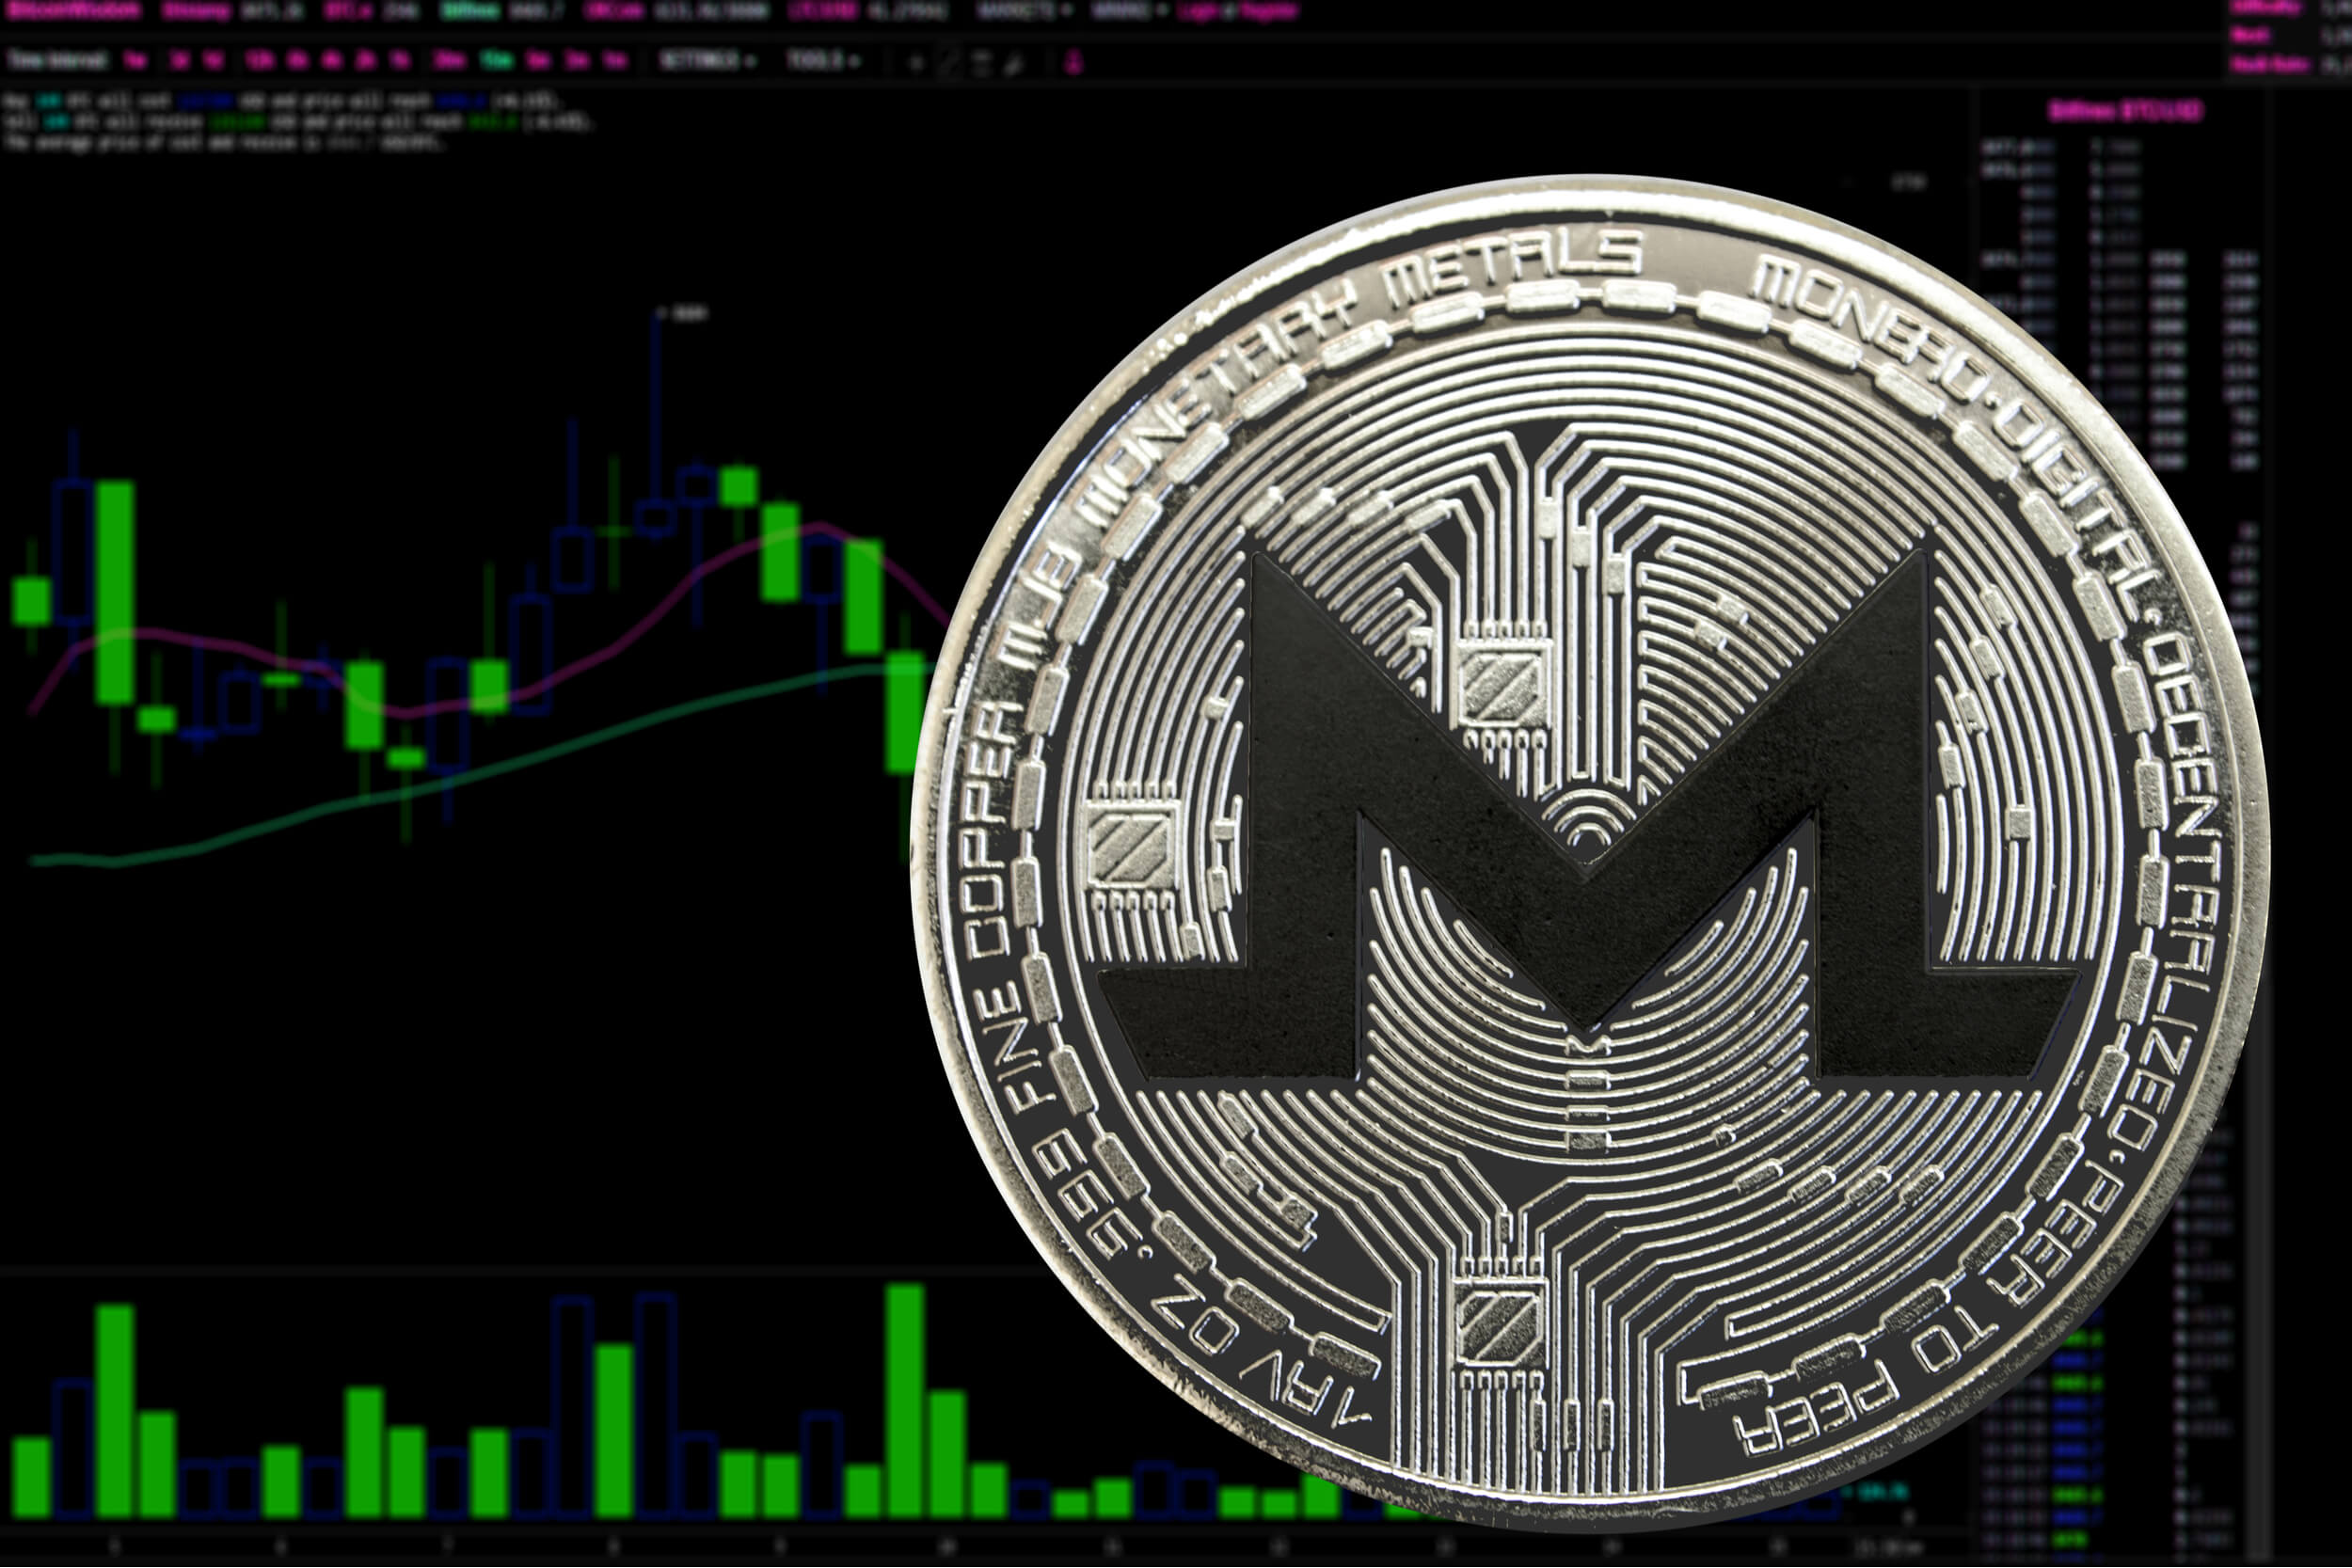 Coin cryptocurrency monero on a background chart.